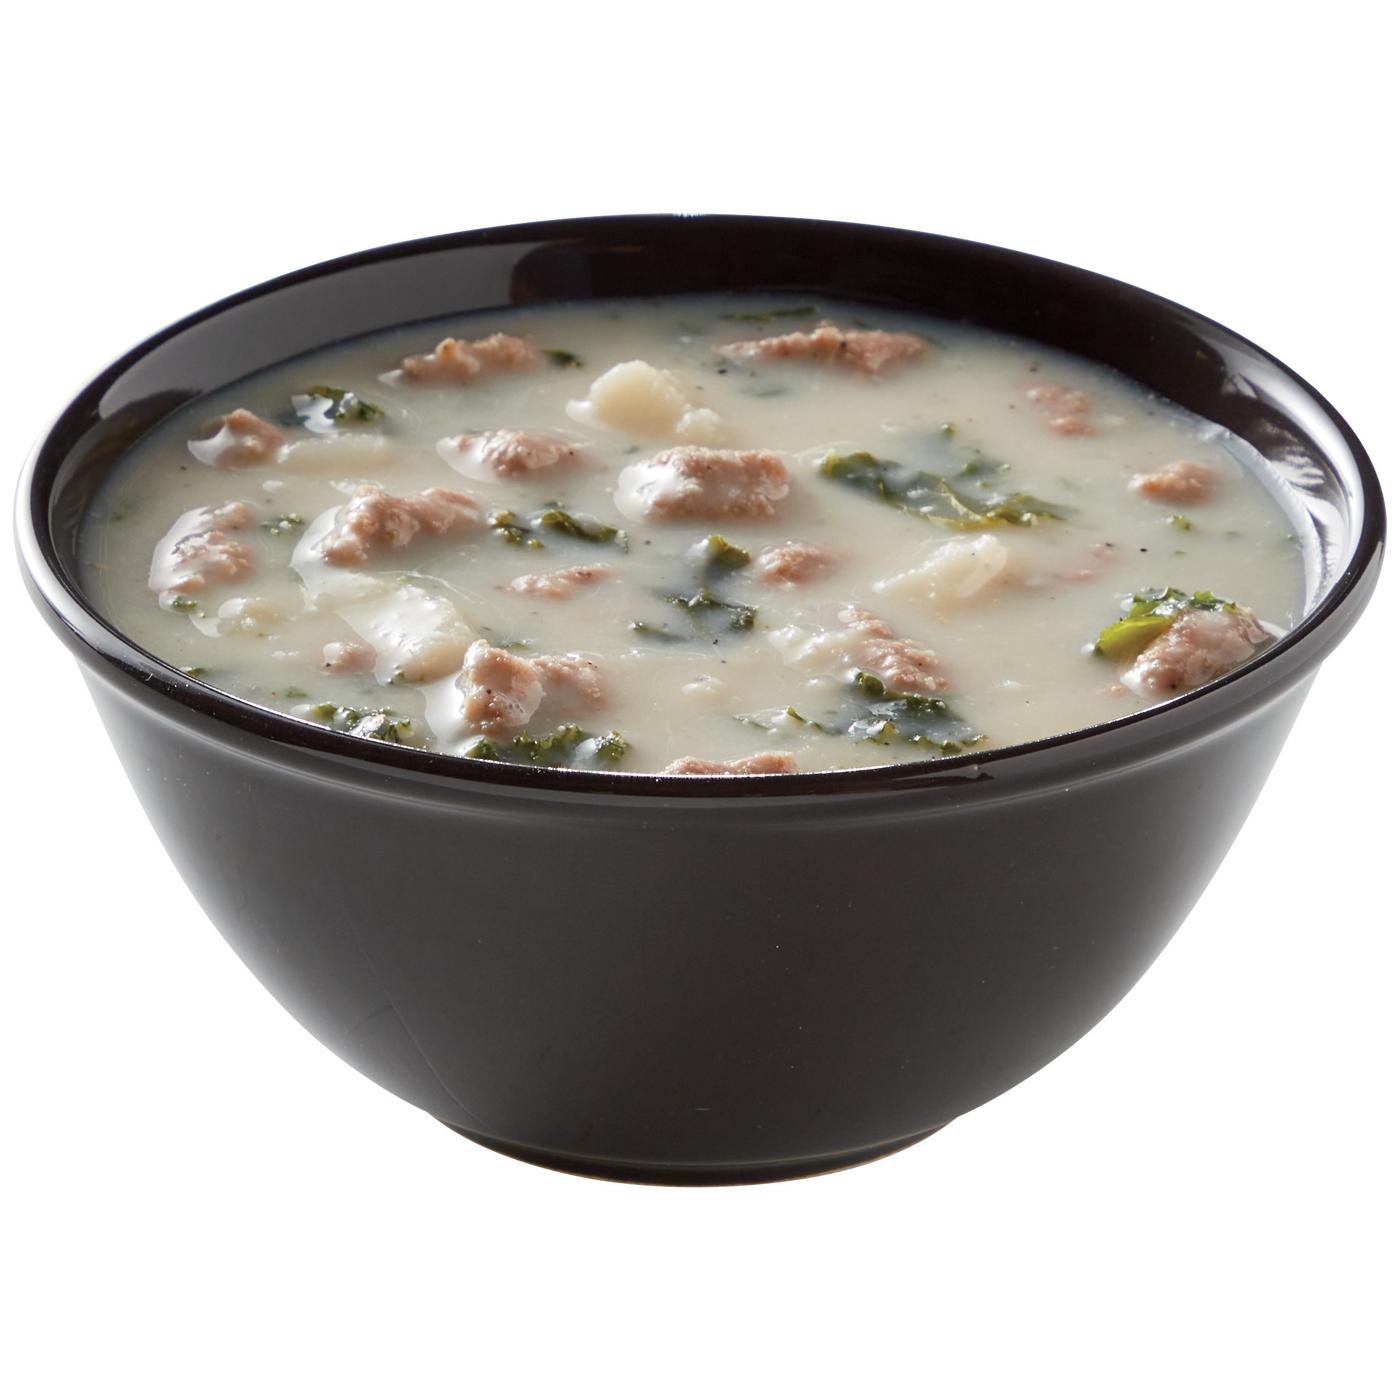 Meal Simple by H-E-B Zuppa Toscana Soup; image 2 of 2